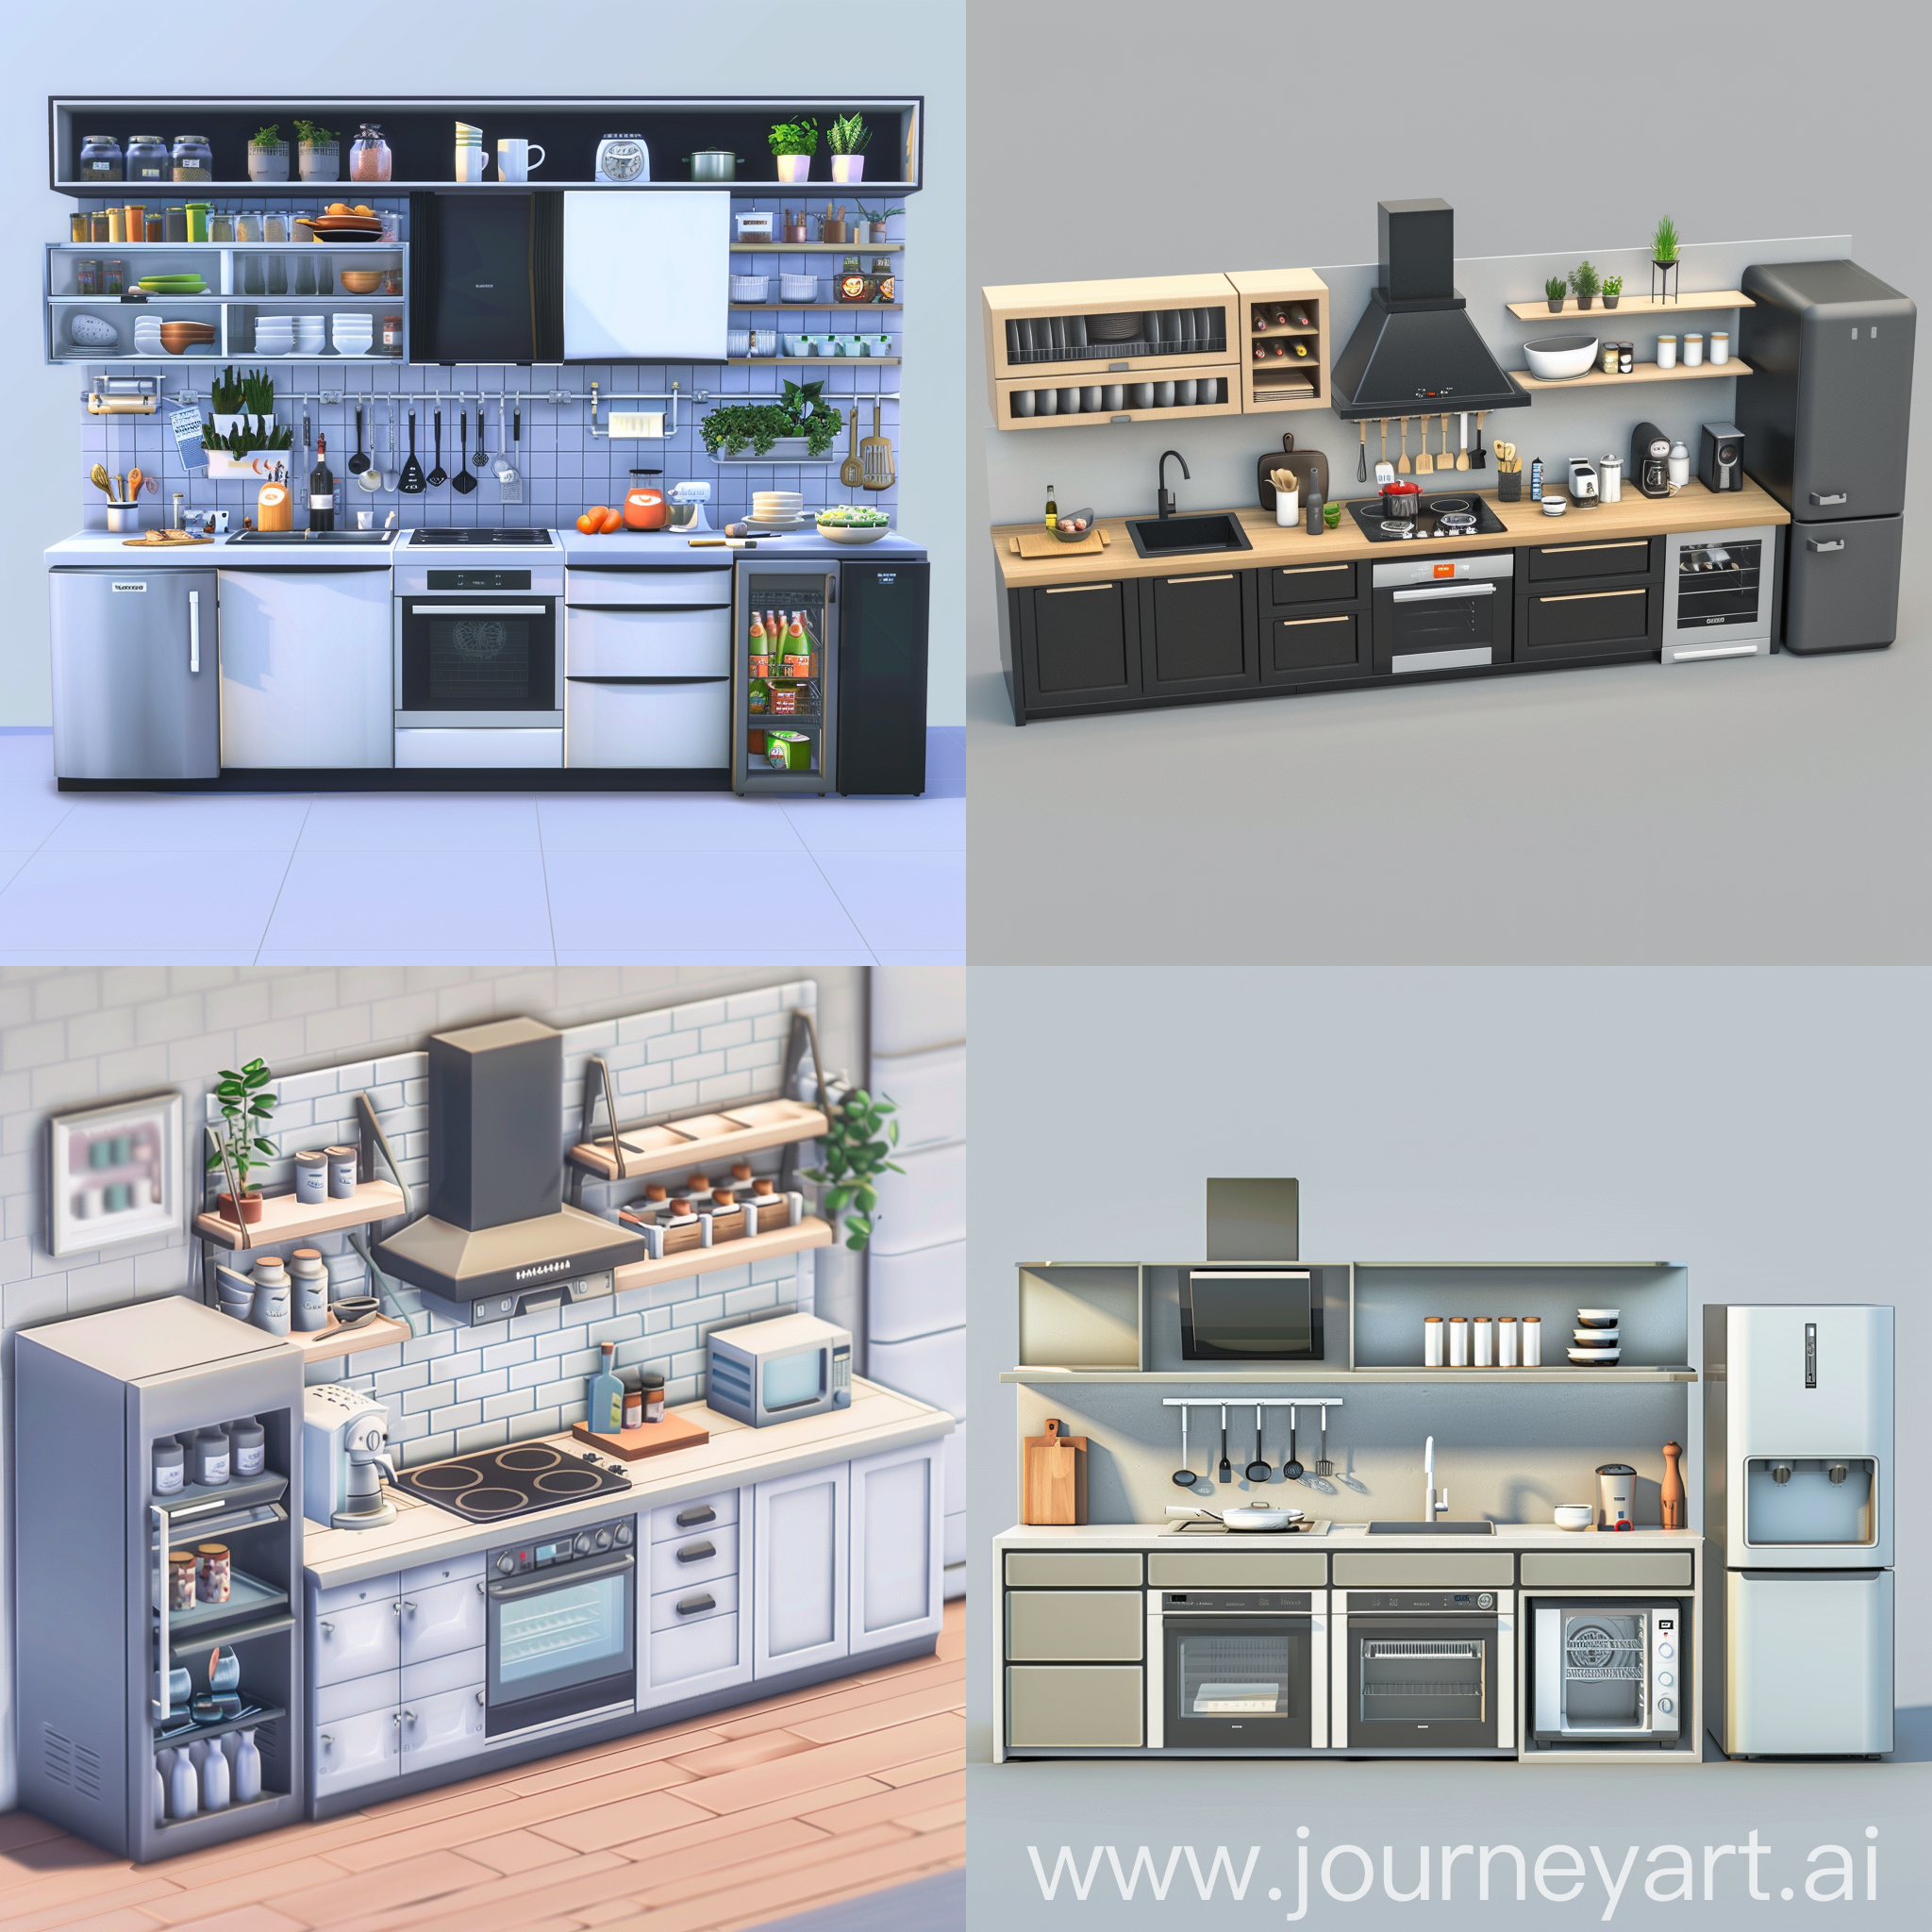 create a picture of a kitchen set. 180cm wide.  It has a countertop, oven, hob, frigobar and storage. It should be minimalist, functional and aesthetically pleasing